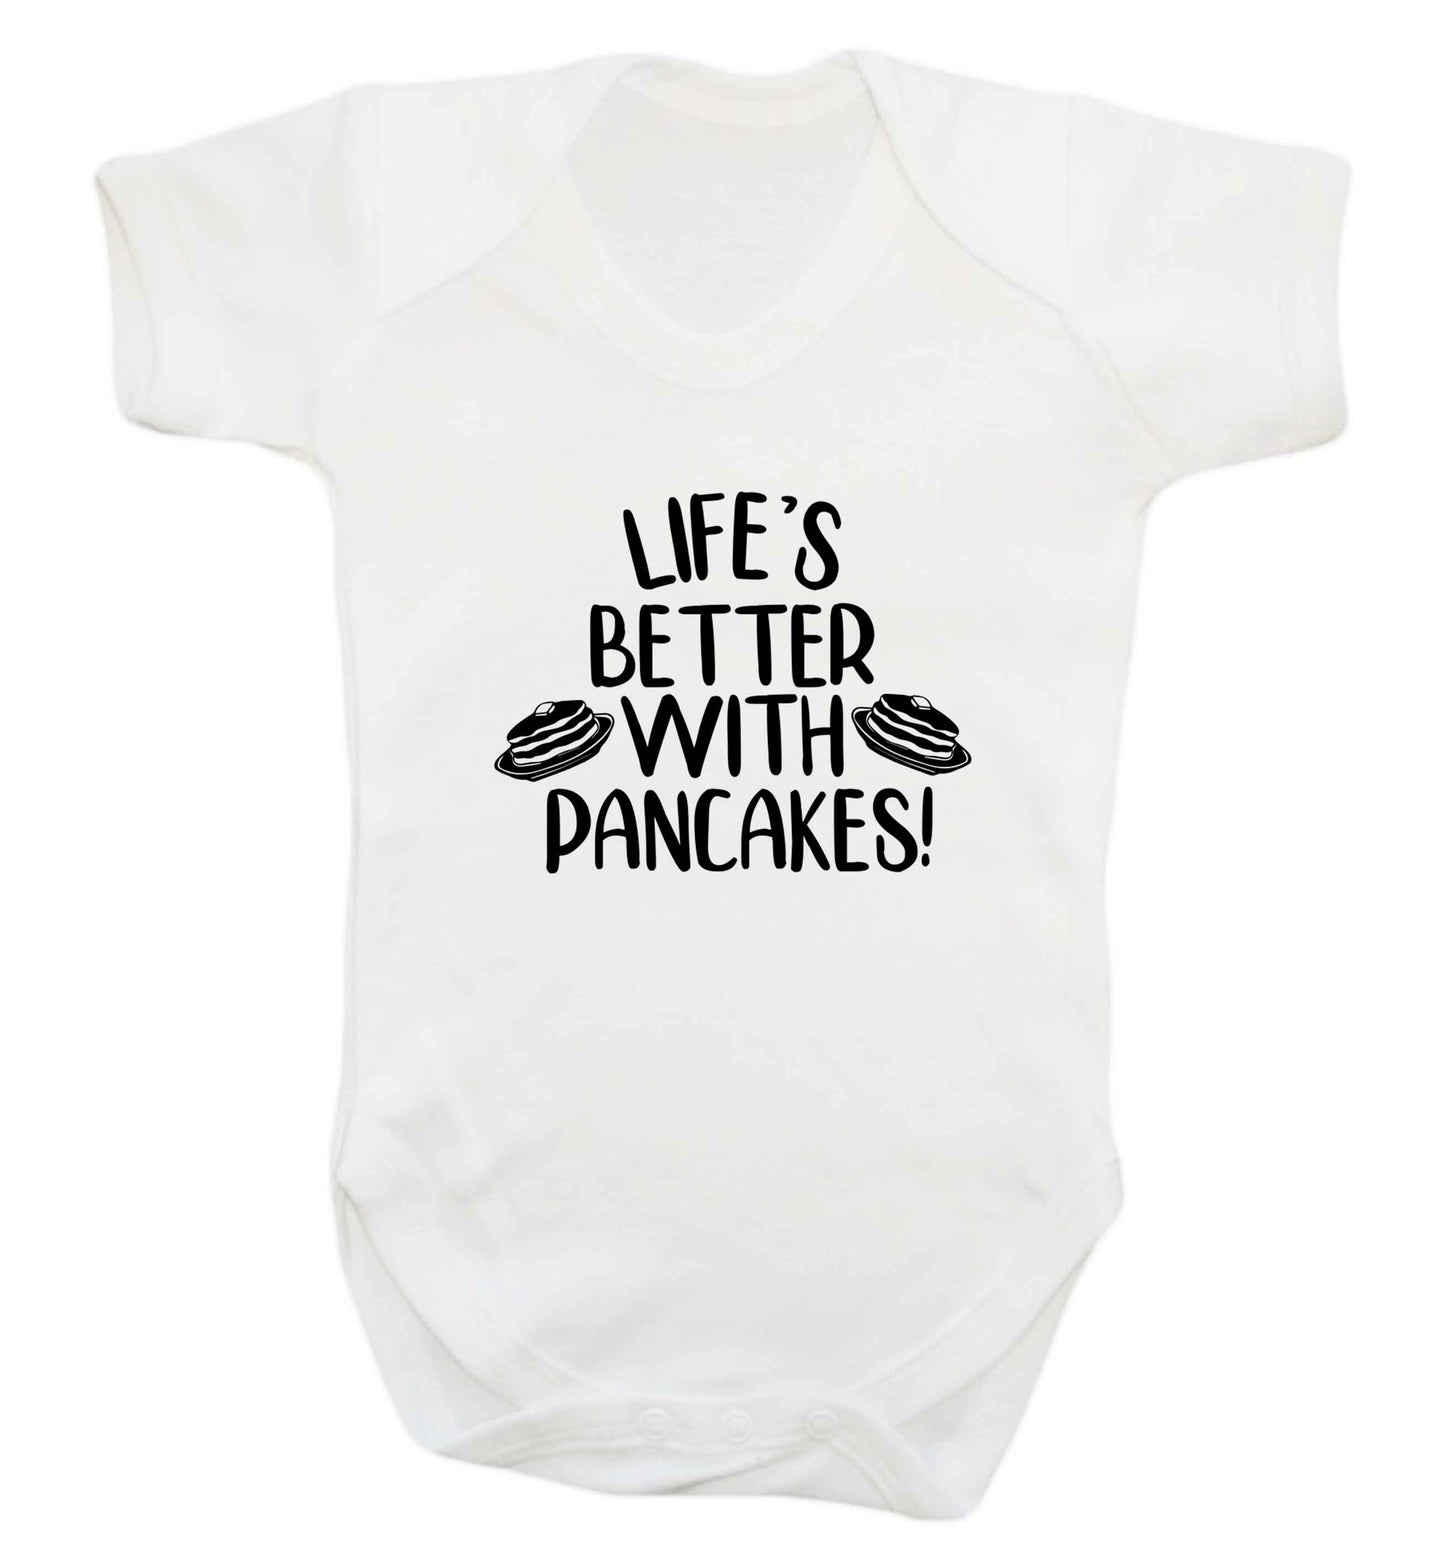 Life's better with pancakes baby vest white 18-24 months